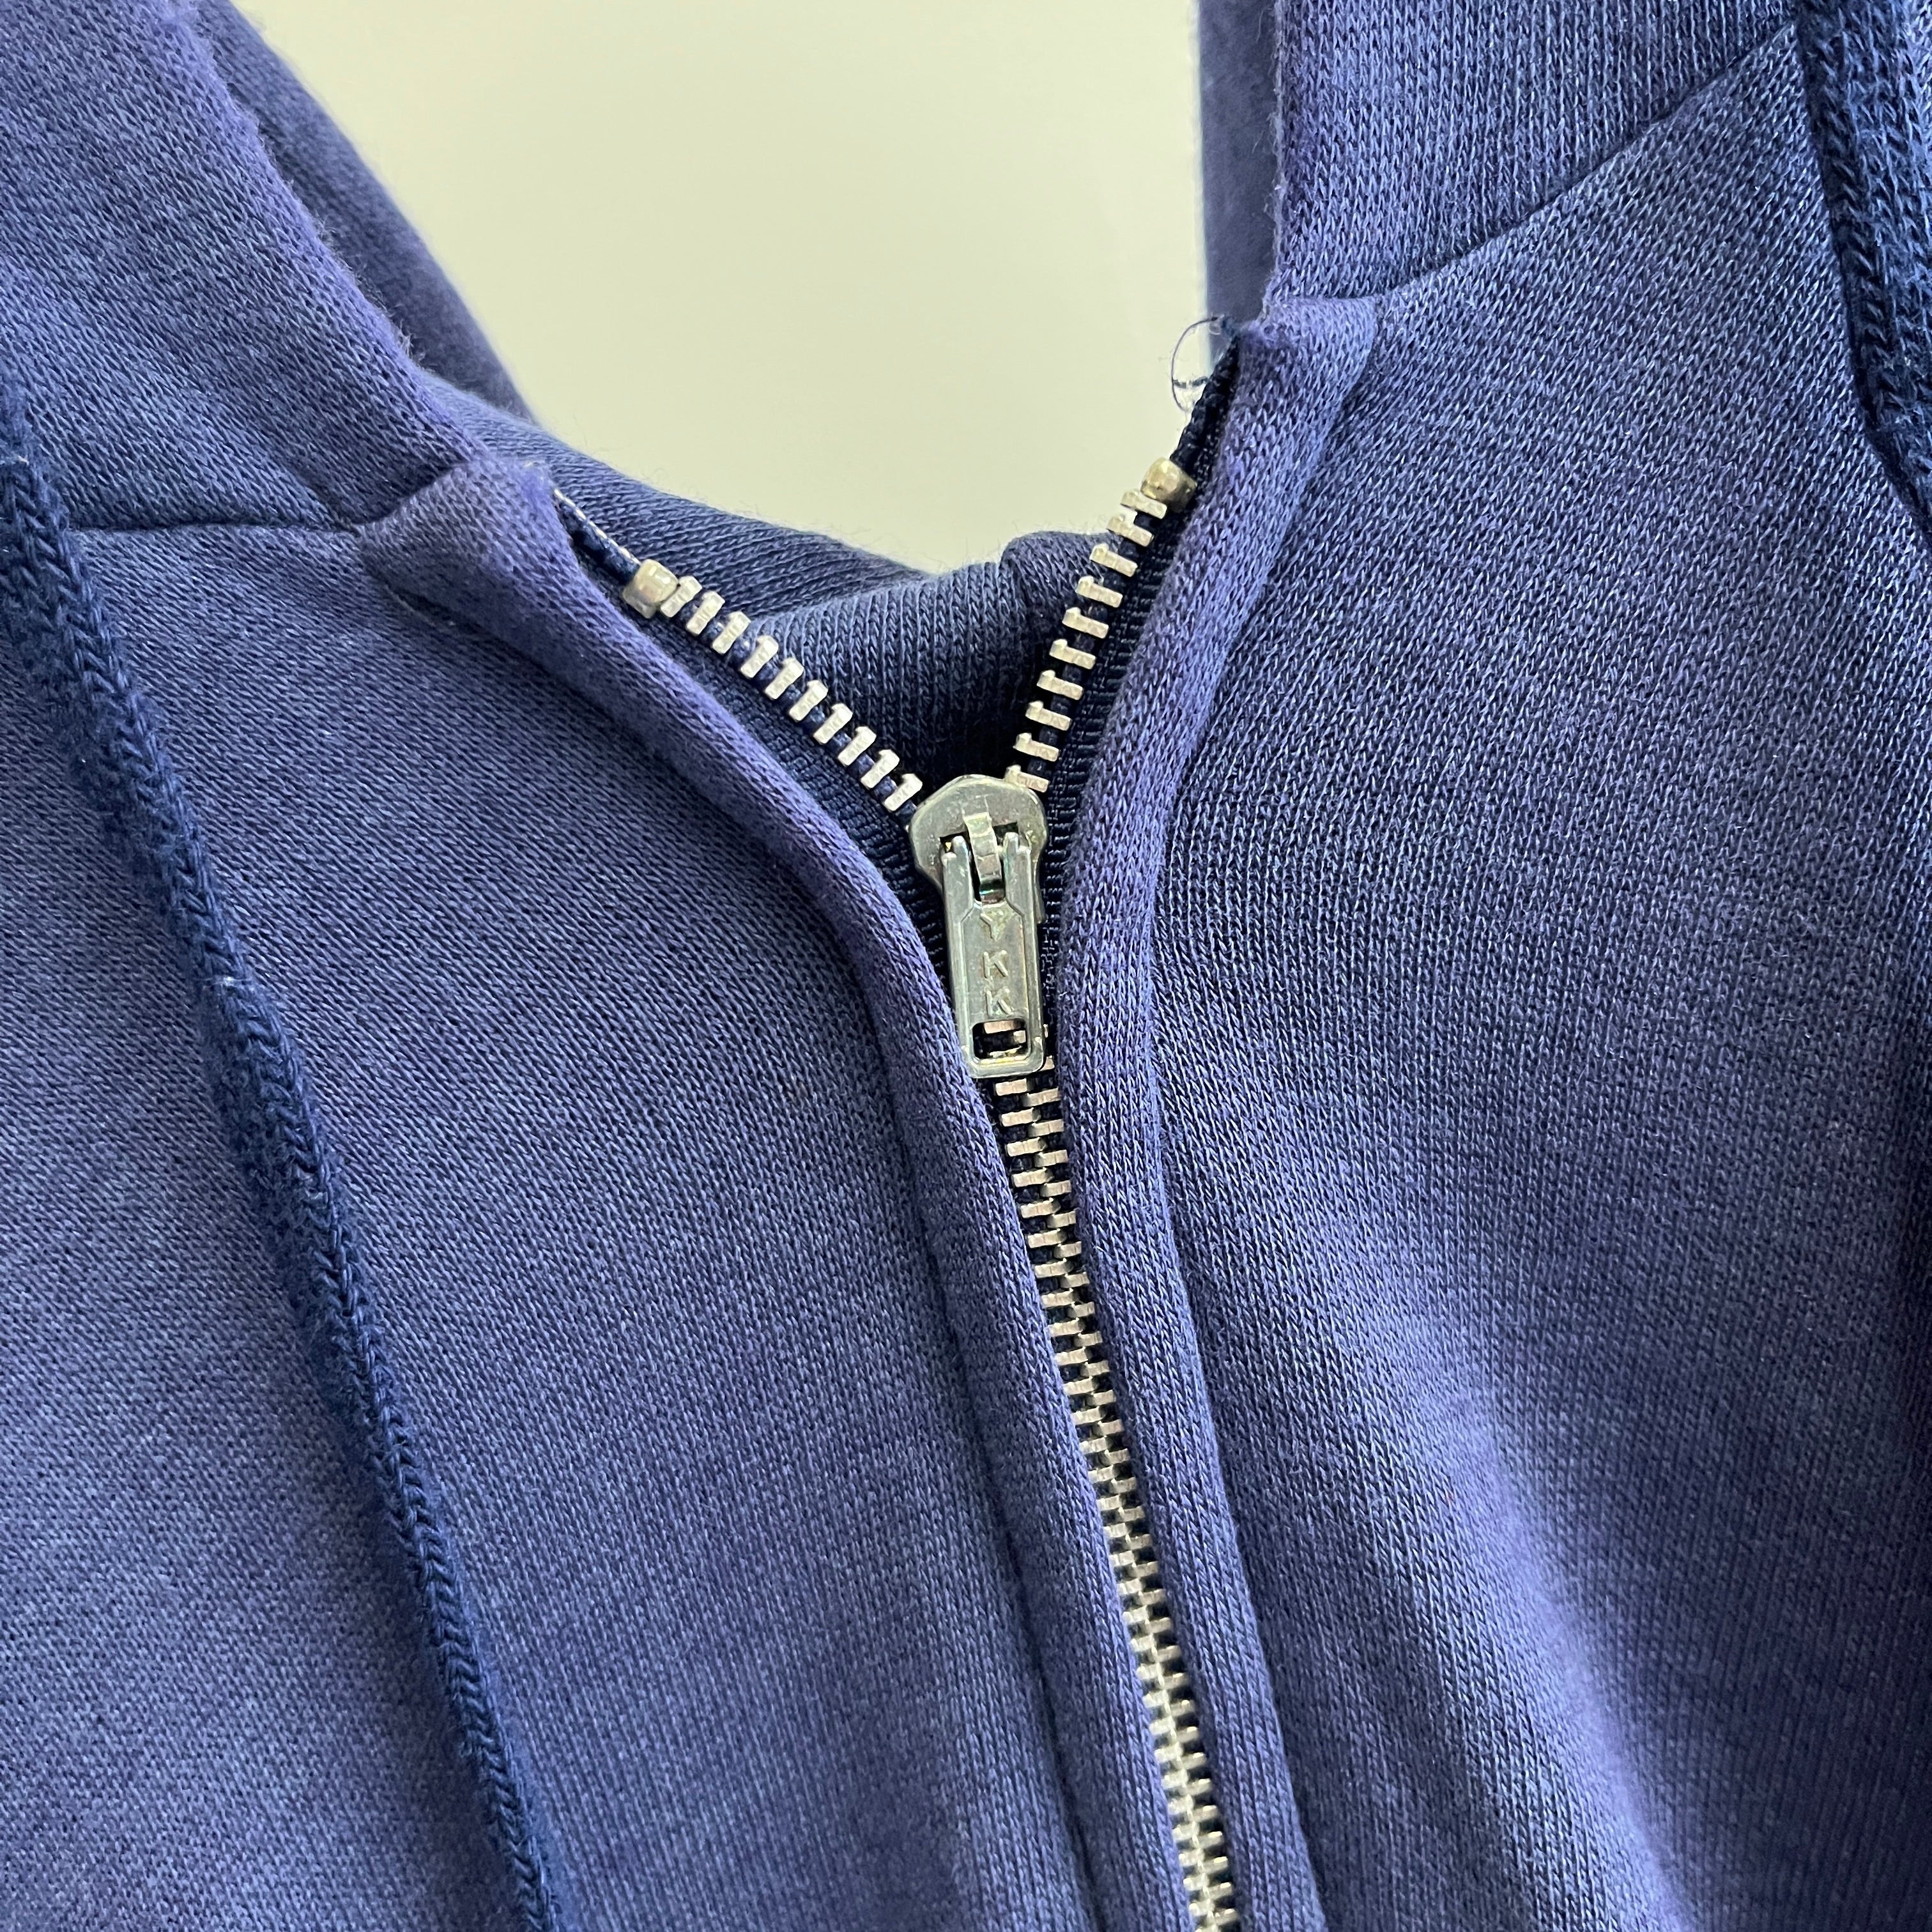 1970s Super Soft, Thin and Slouchy Faded Navy Hoodie